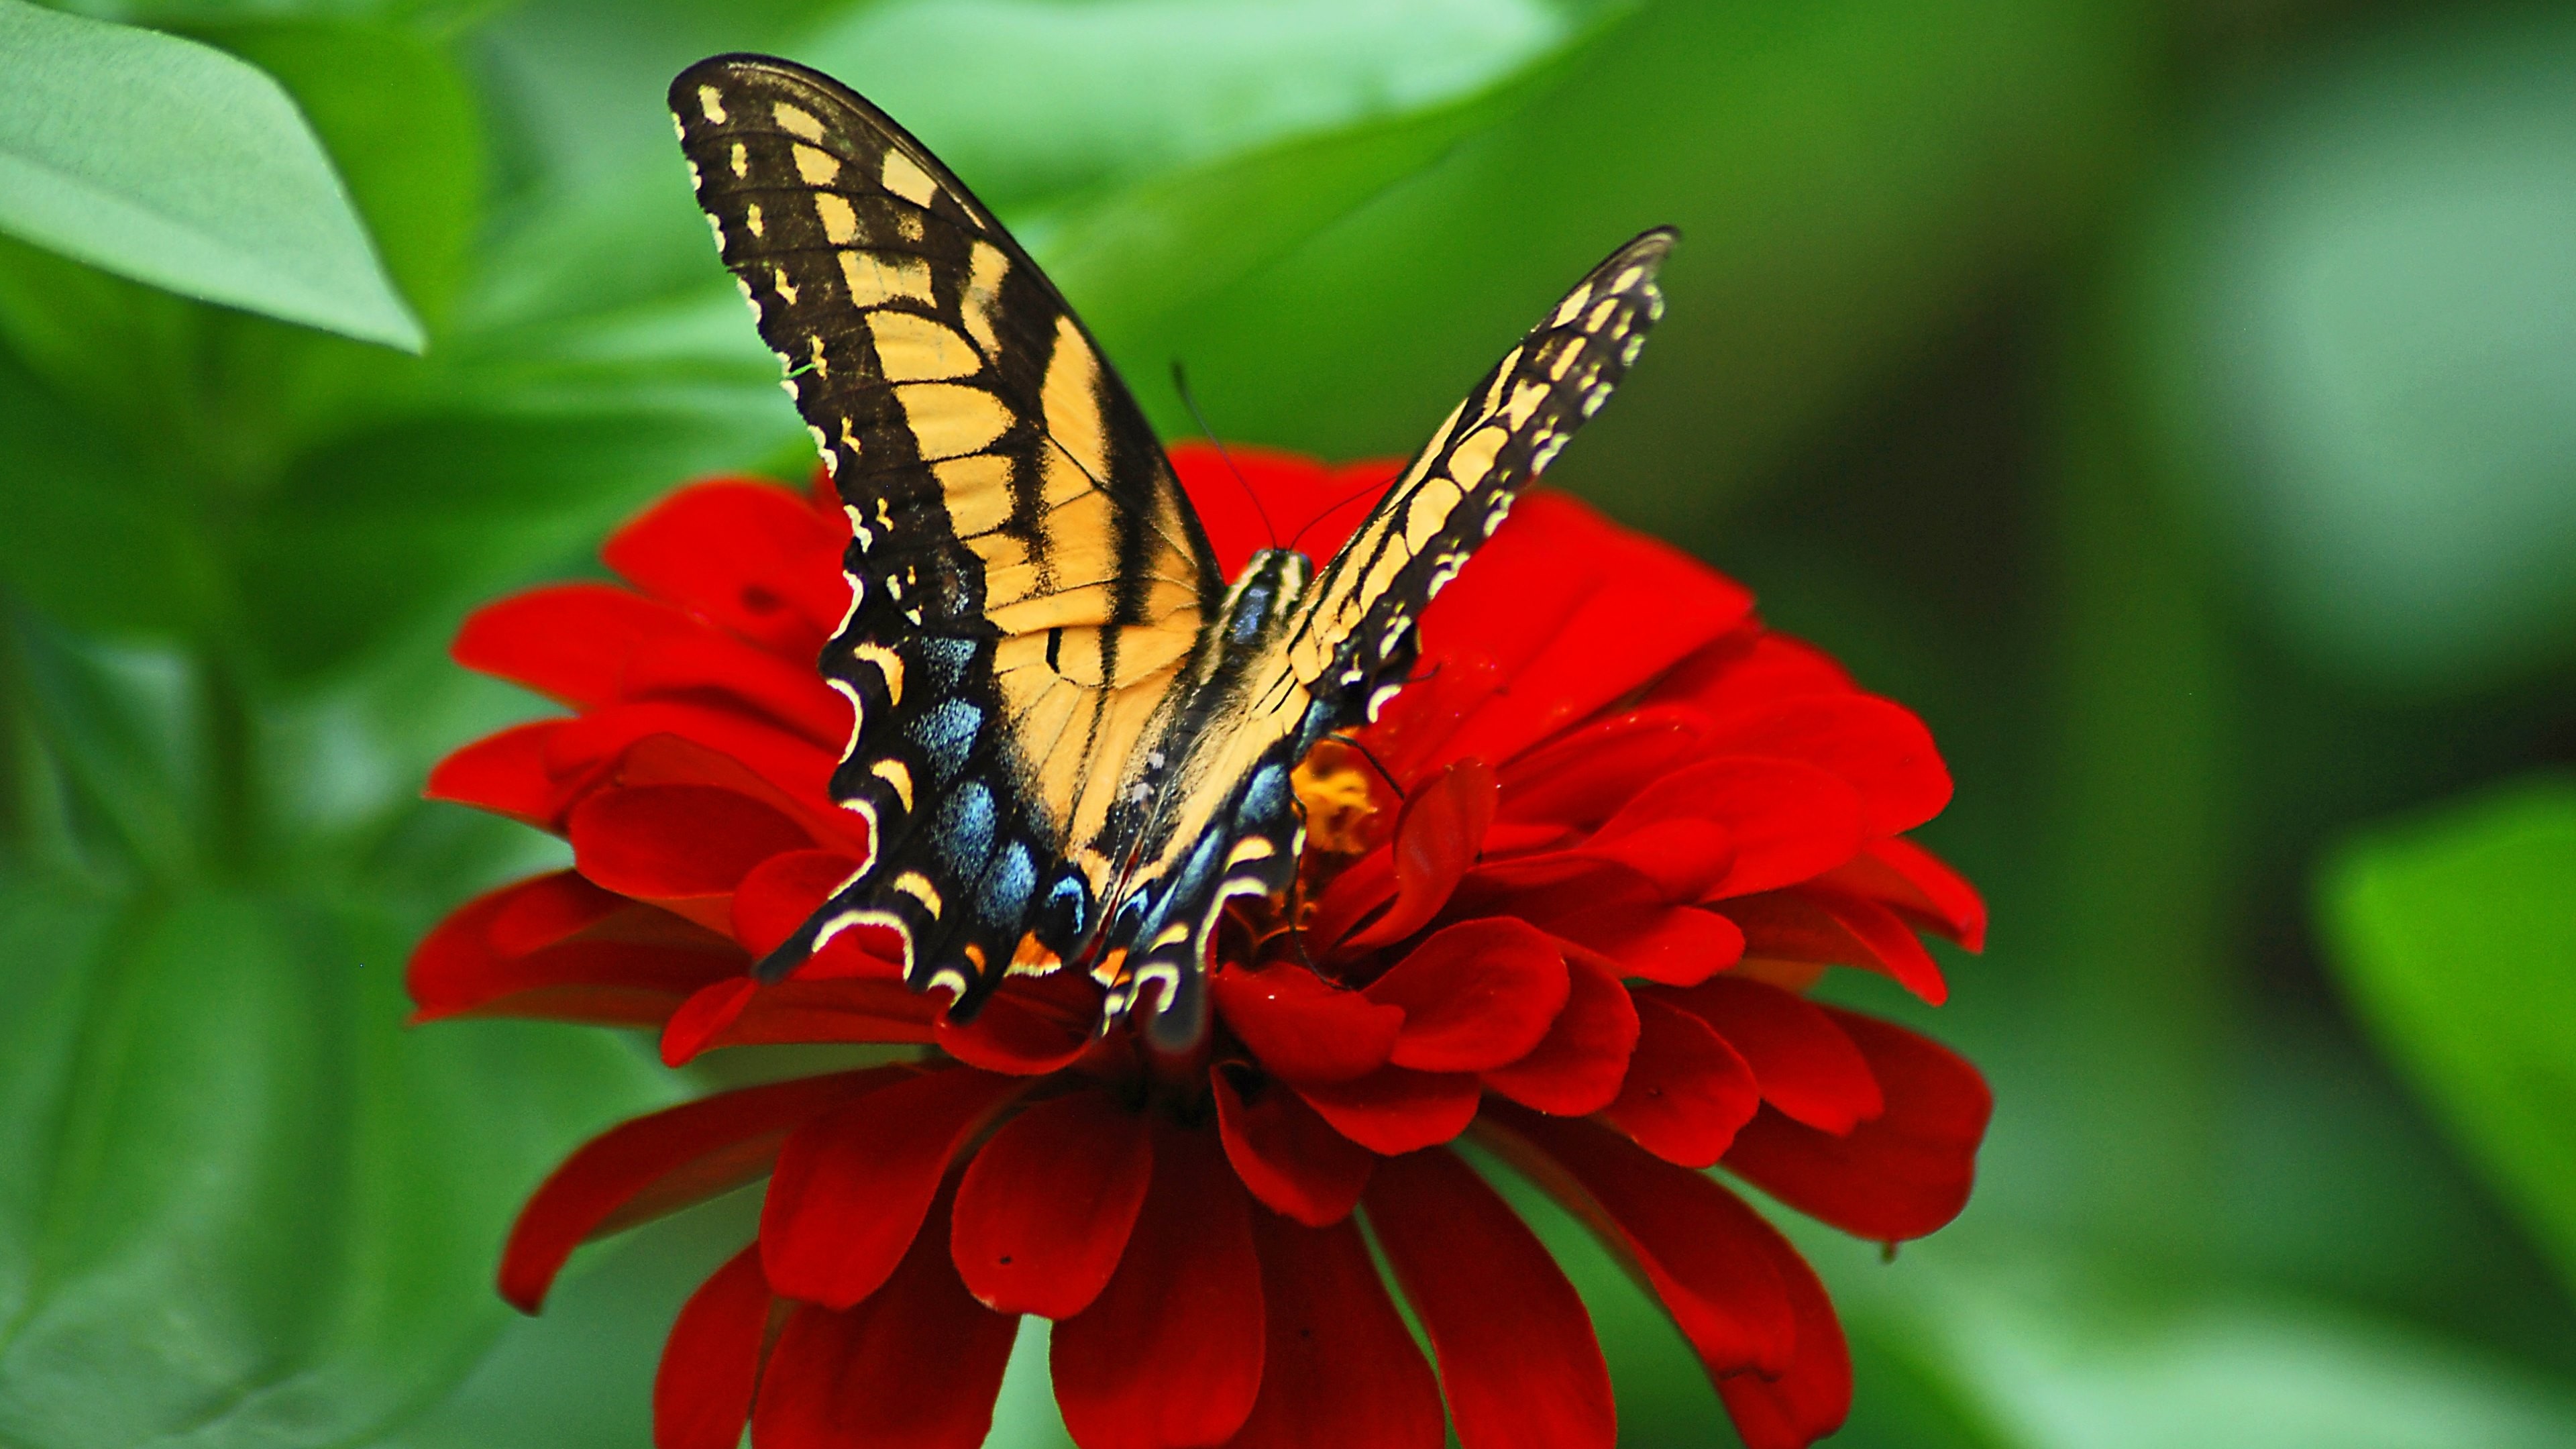 3840x2160 Amazing butterfly hd wallpapers 1080p On Top Wallpaper hd with butterfly hd  wallpapers 1080p Download HD